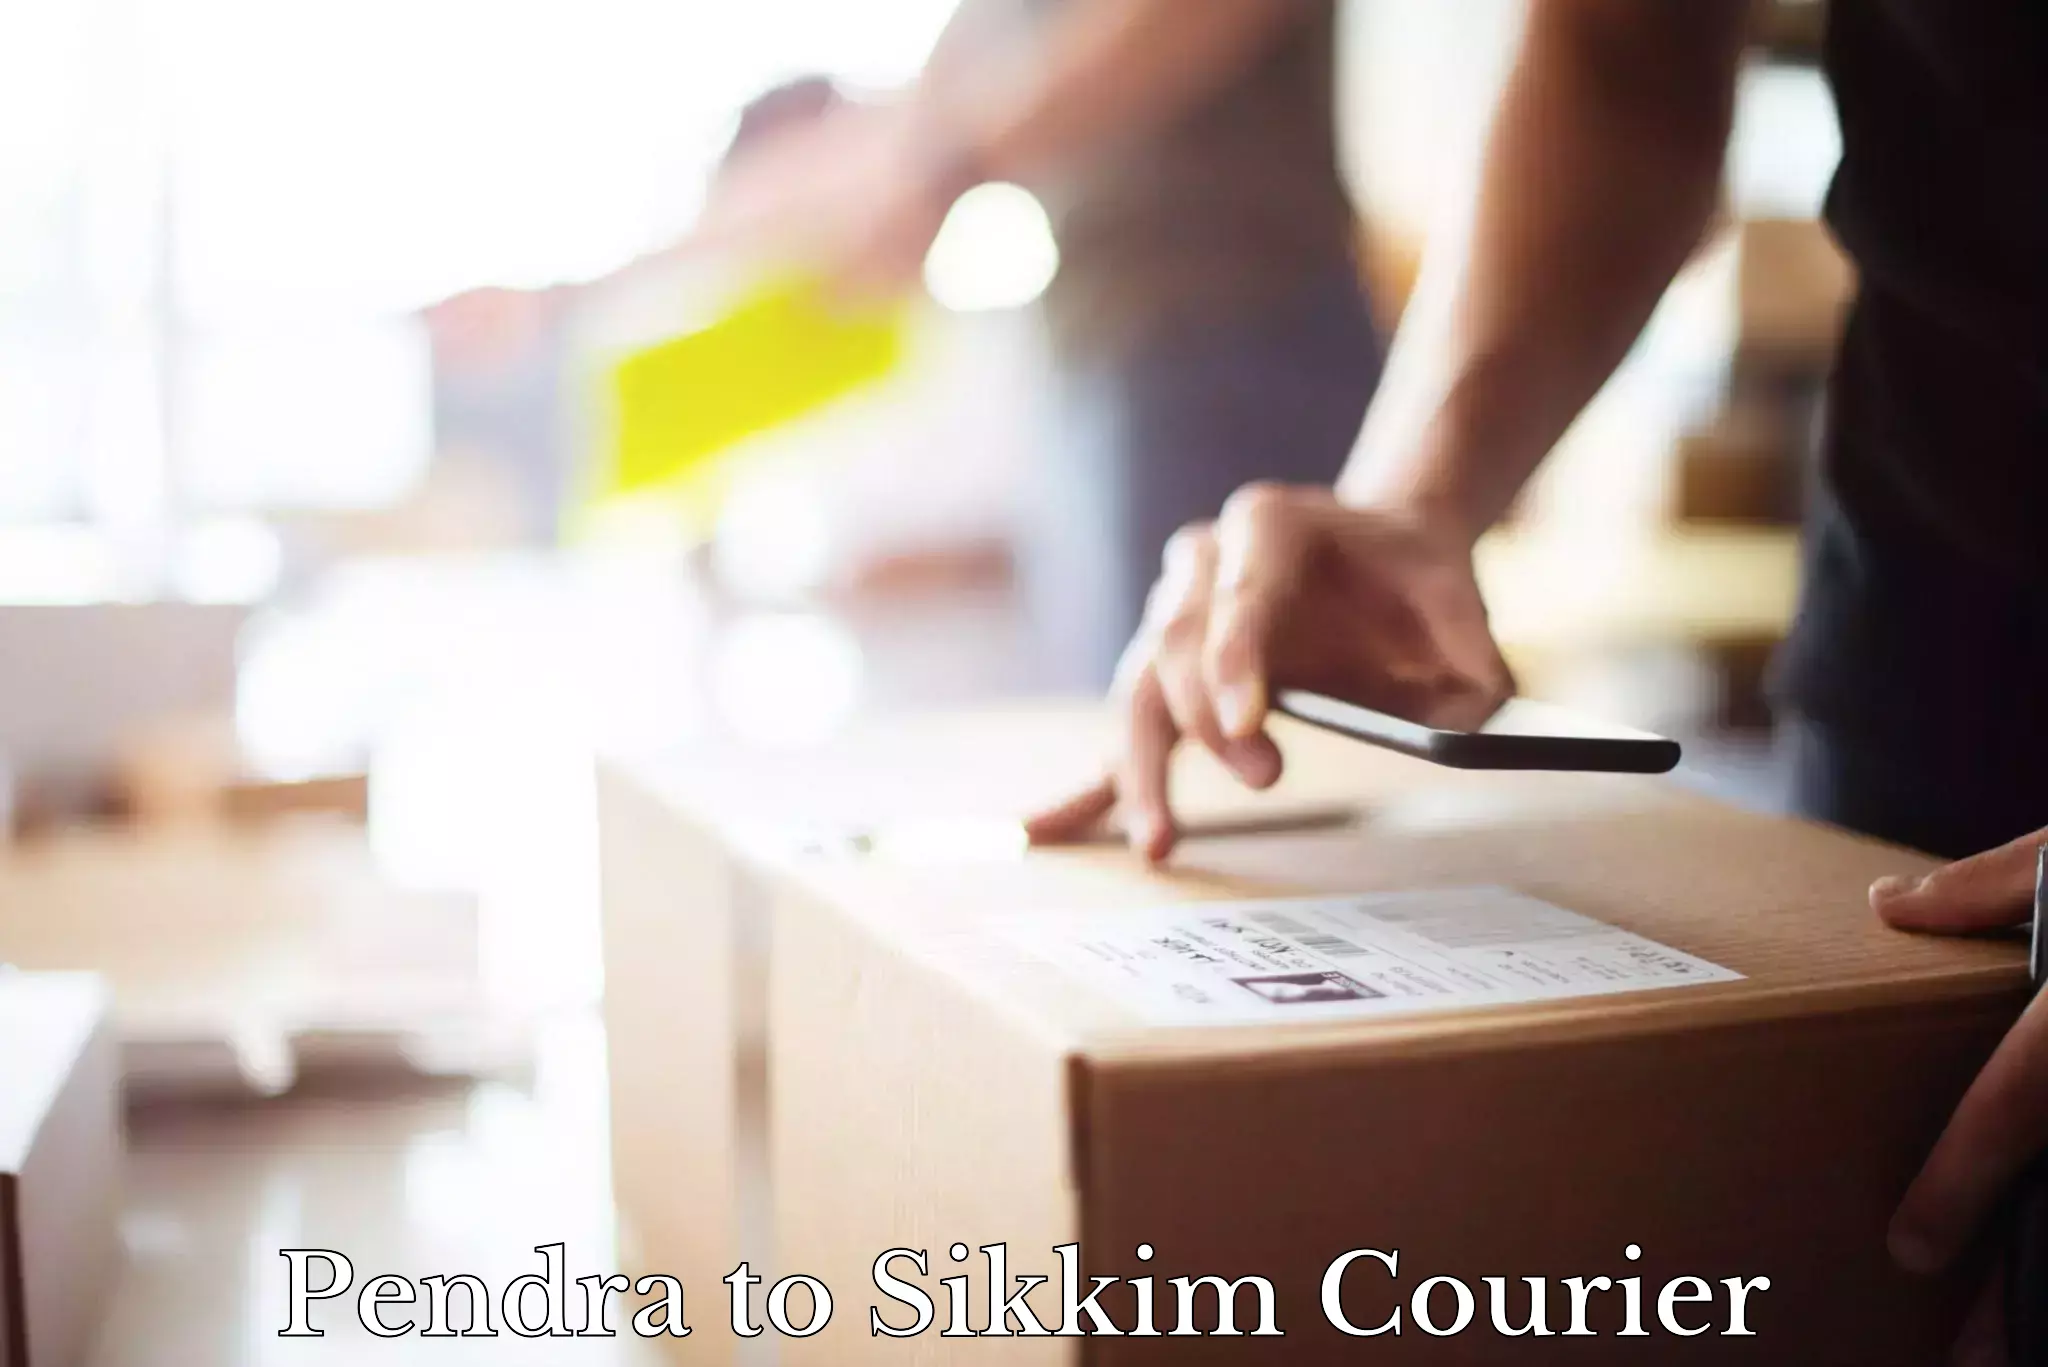 Discounted shipping Pendra to Sikkim